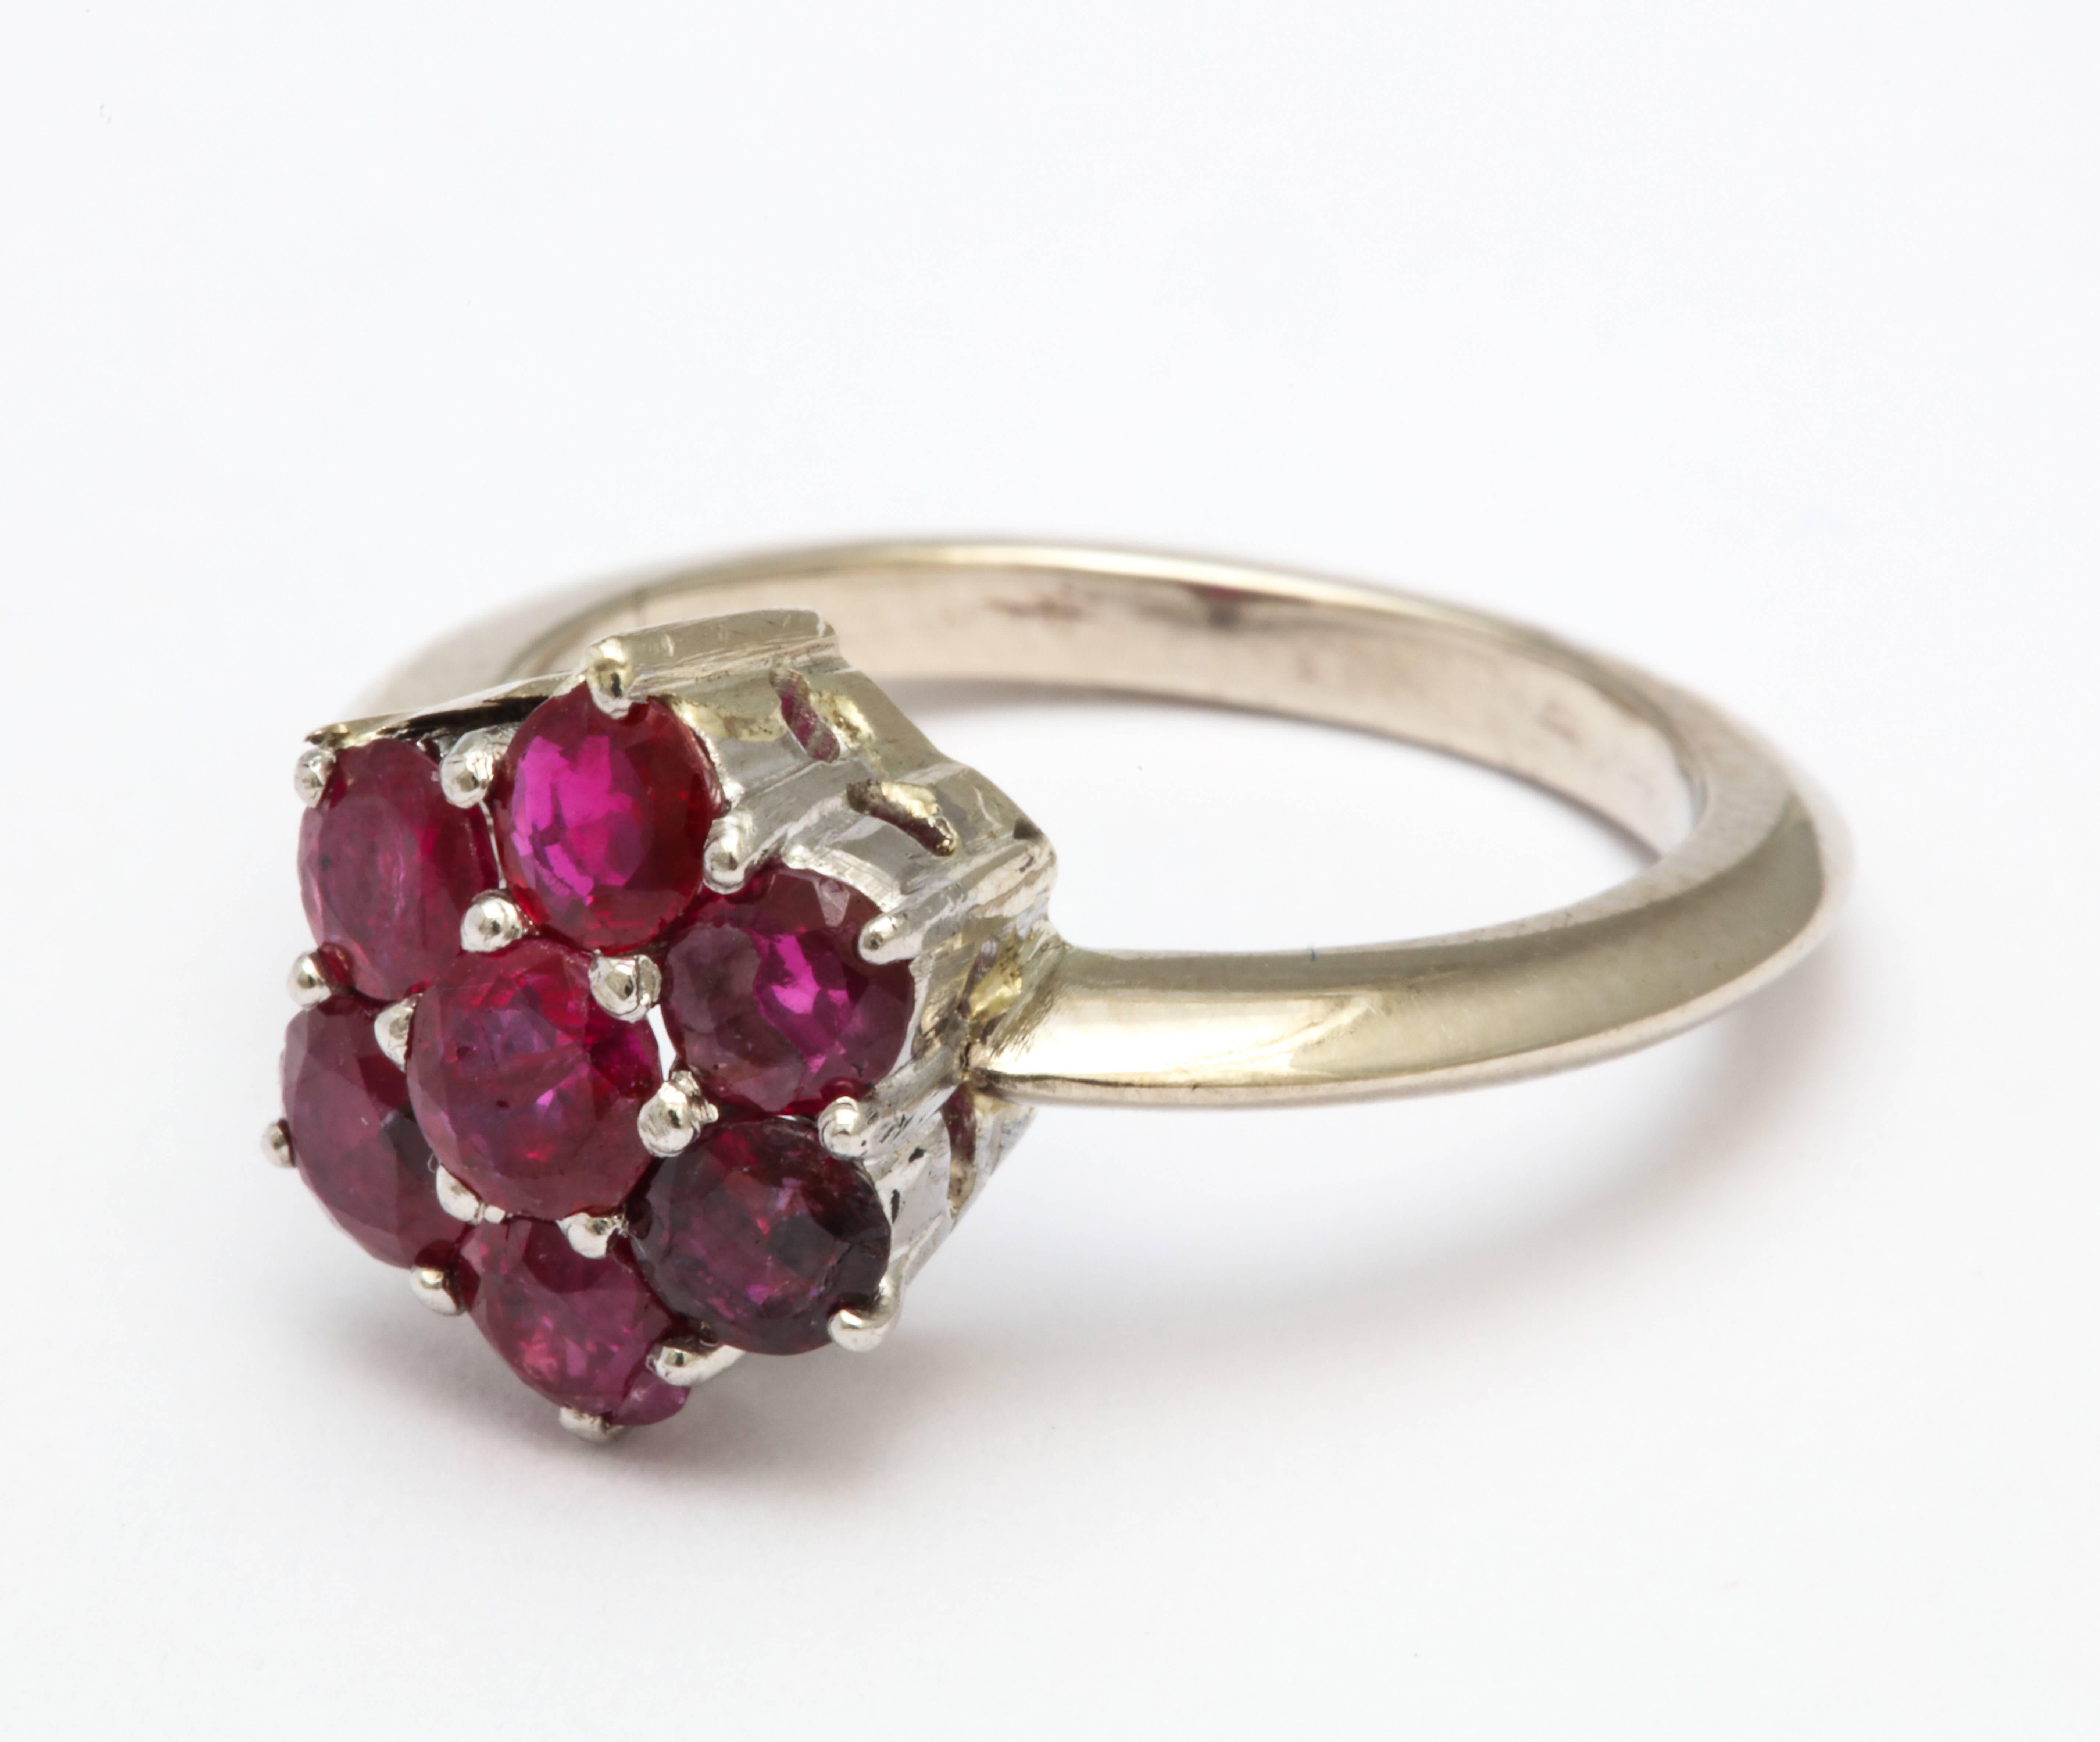 A wonderful re-fashioned ring in platinum and white gold  with a grouping of untreated natural rubies set in a floral arrangement. This ring has a matching diamond ring which was worn as one
and we have separated.